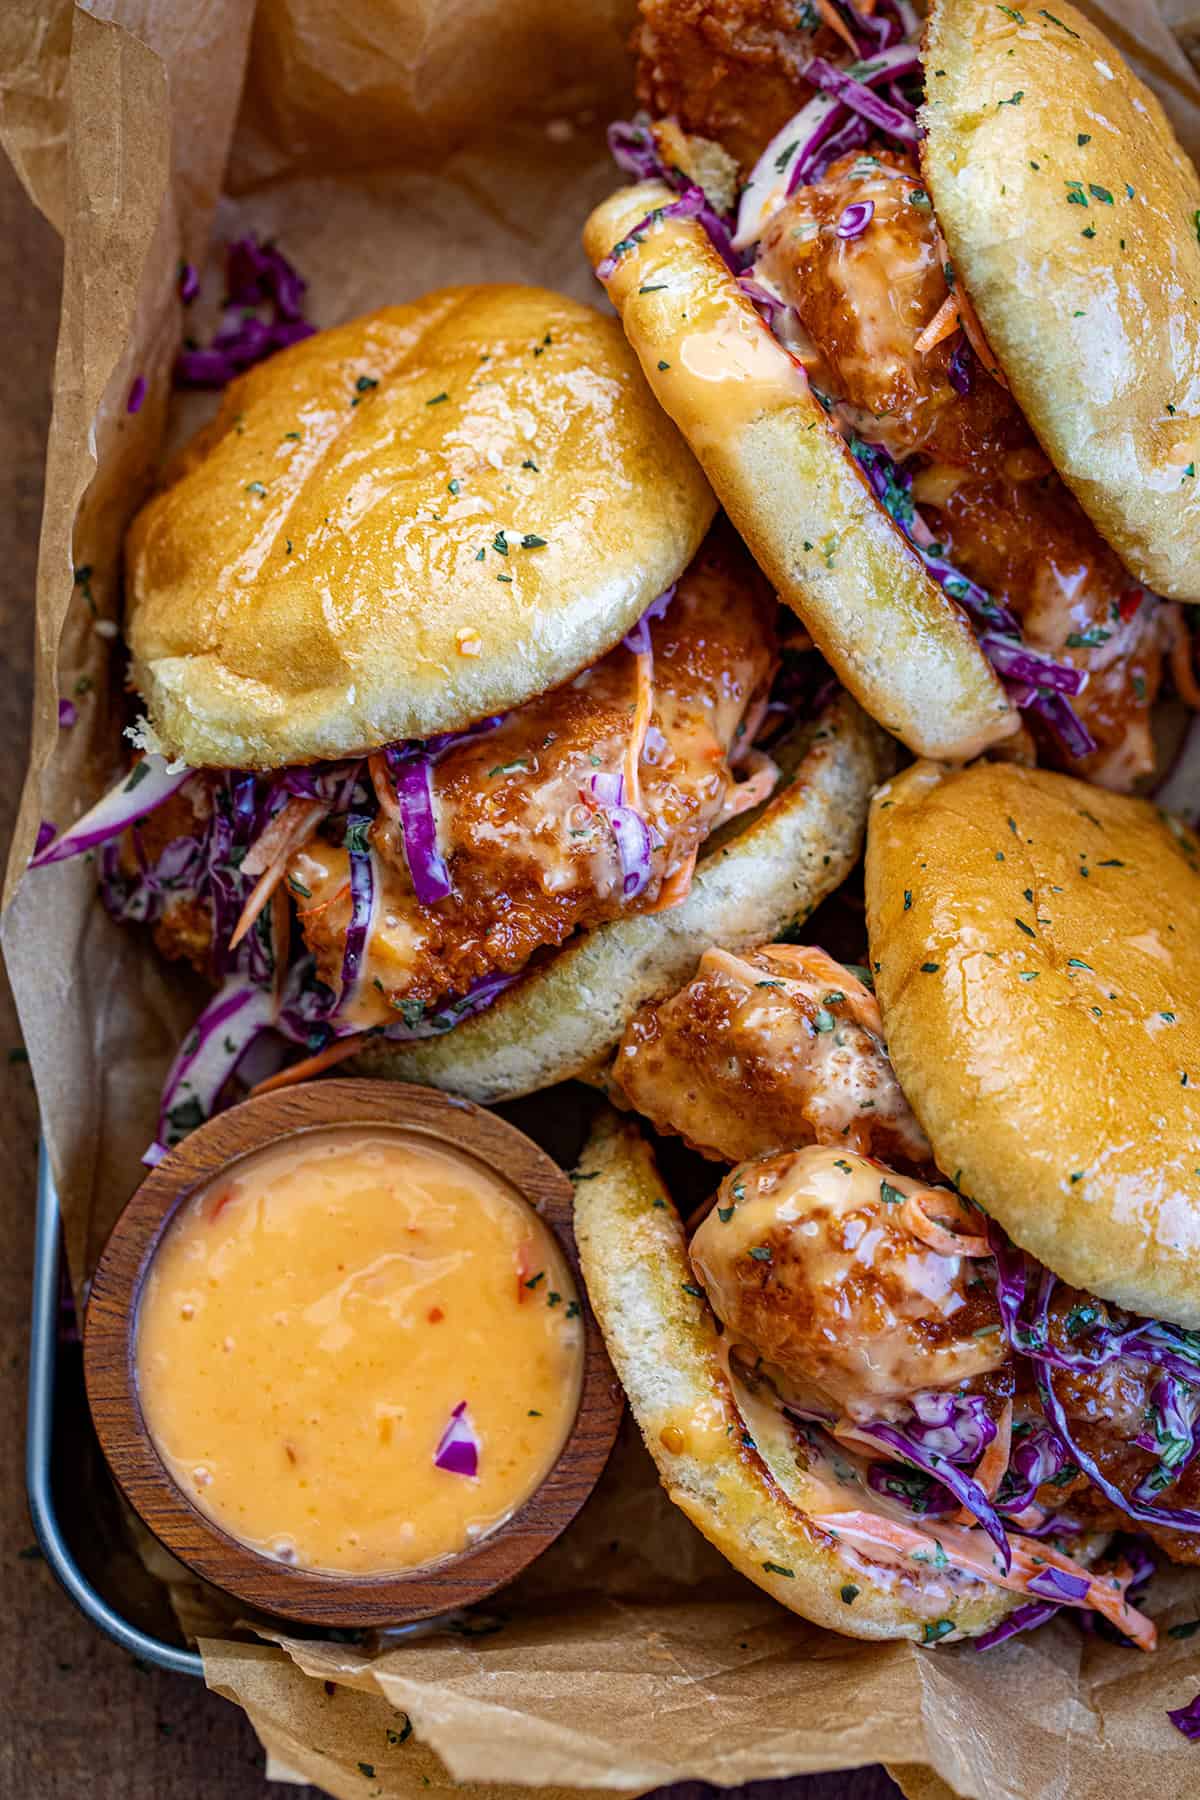 Bang Bang Chicken Sandwiches in a pan on a wooden table from overhead.